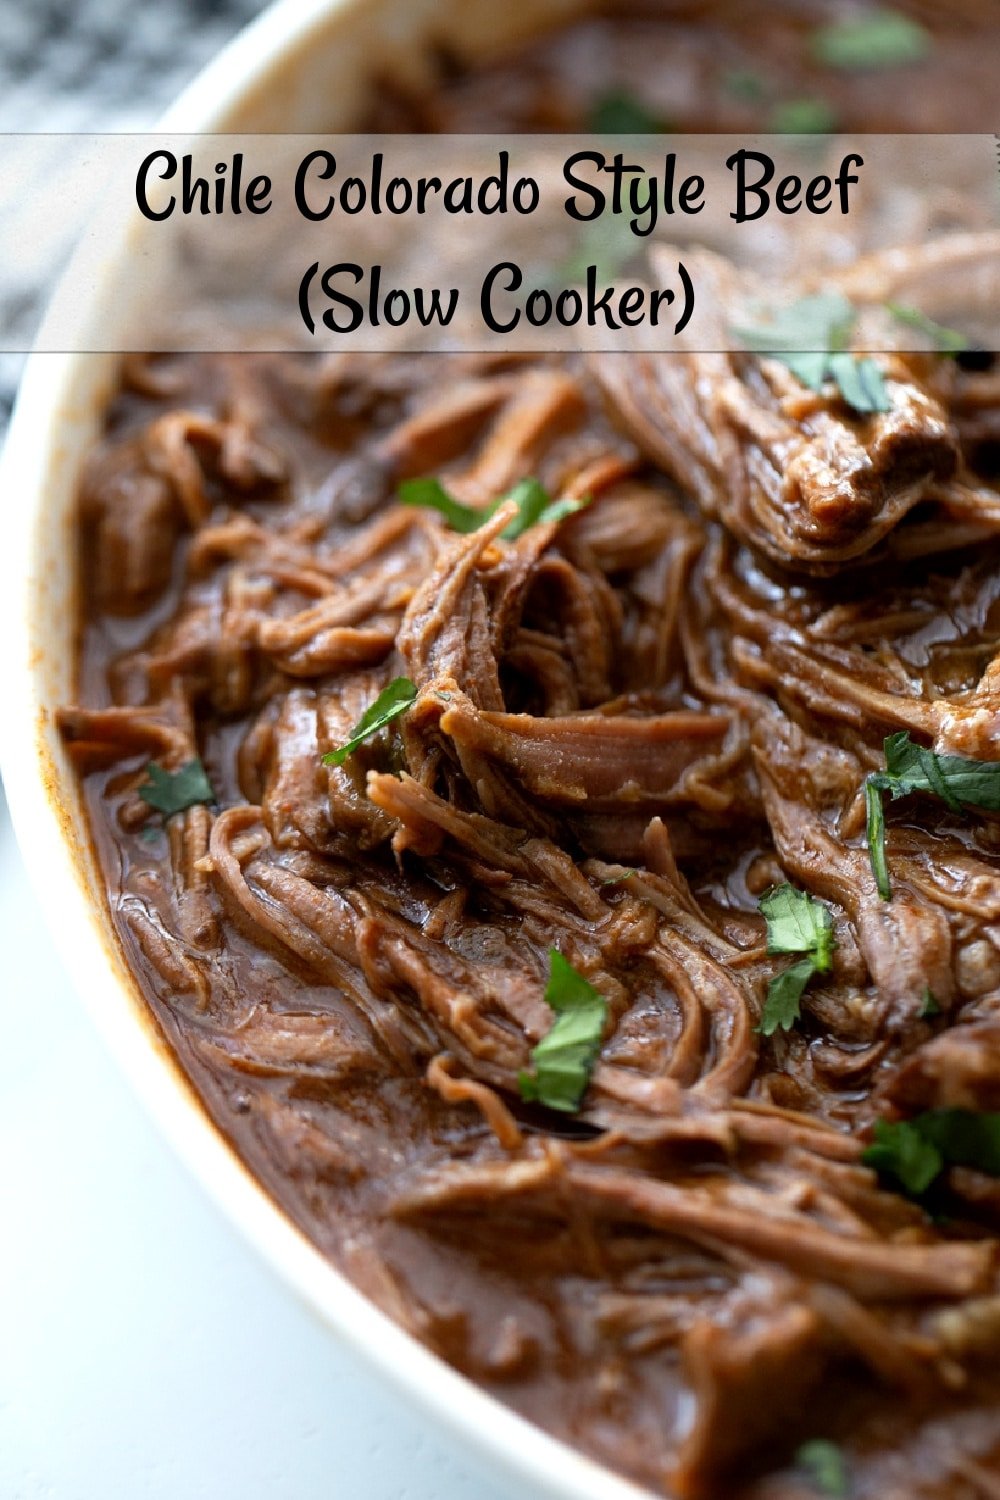 Chile Colorado Style Beef made in the slow cooker in a simple and easy way. Serve it in a warm tortilla and enjoy it's deliciousness. The leftovers, if there are any, are also amazing.  via @cmpollak1